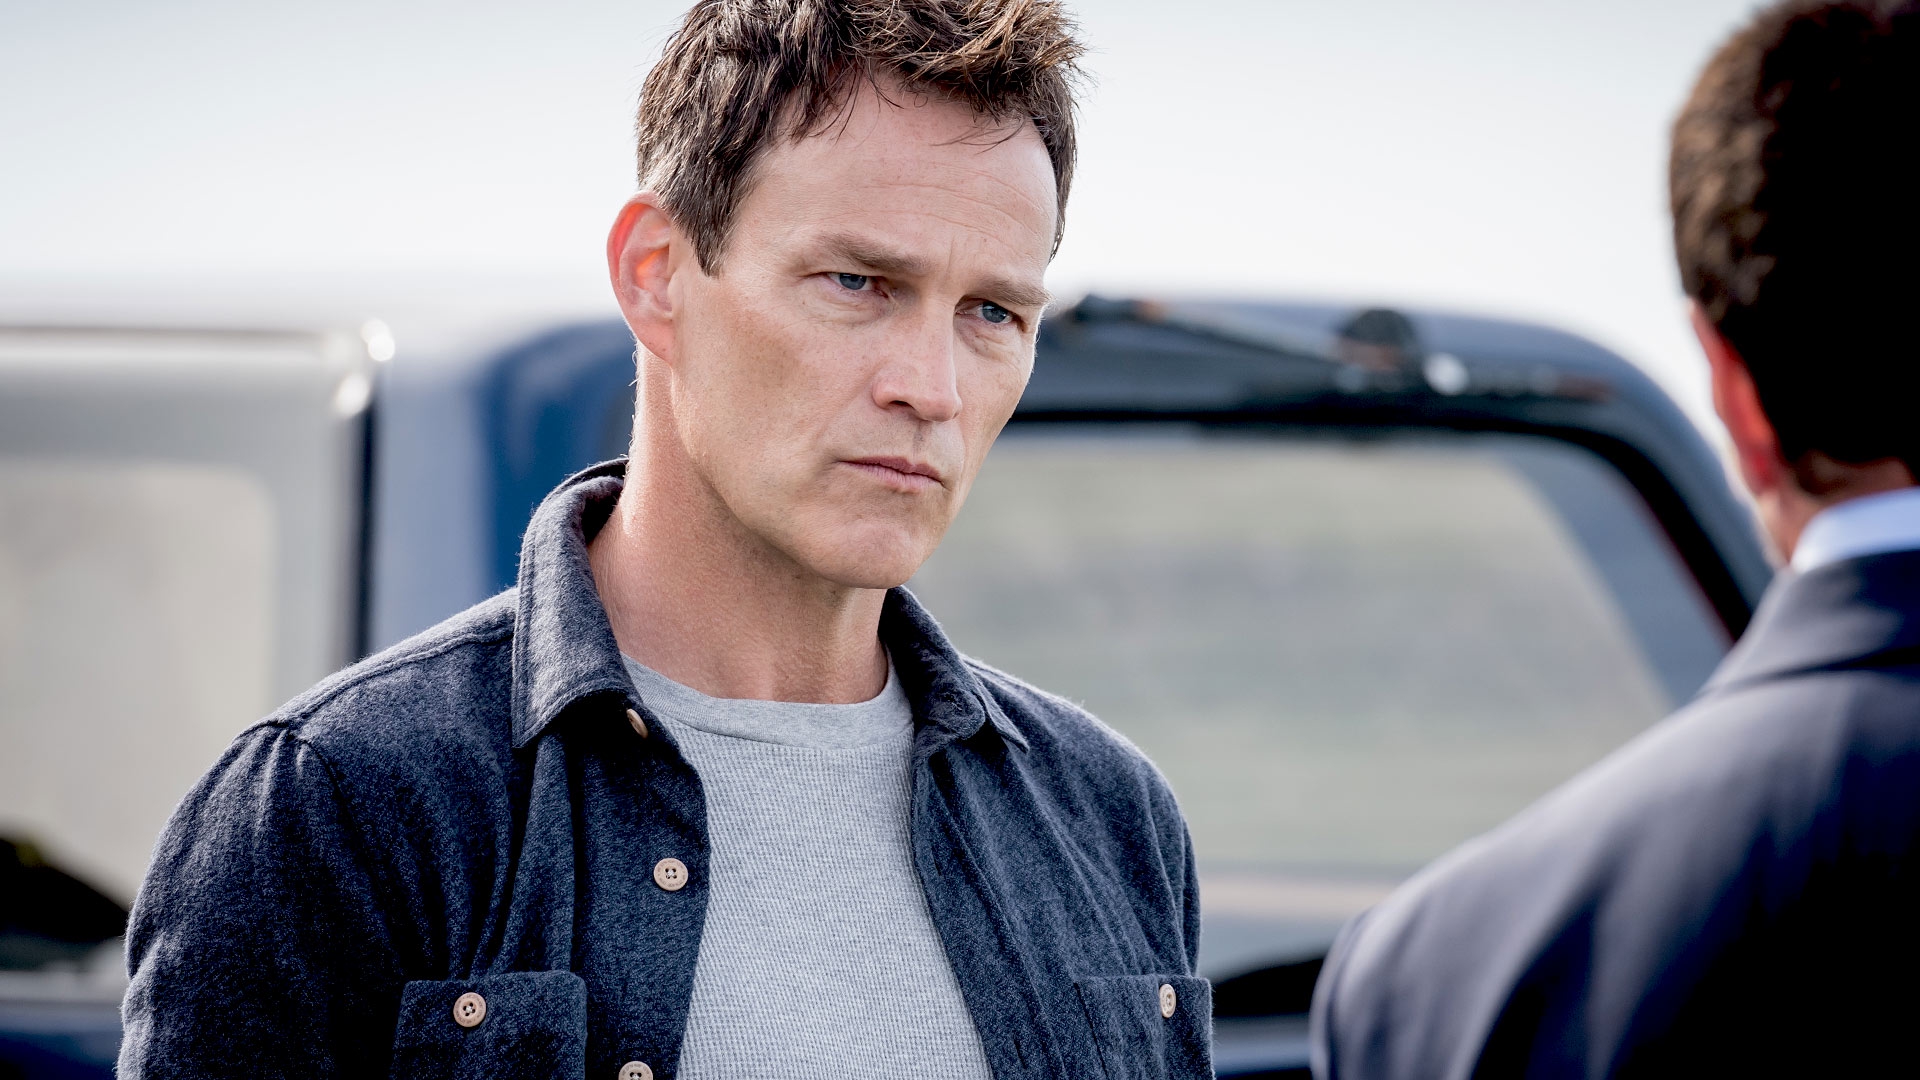 Stephen Moyer standing next to a car